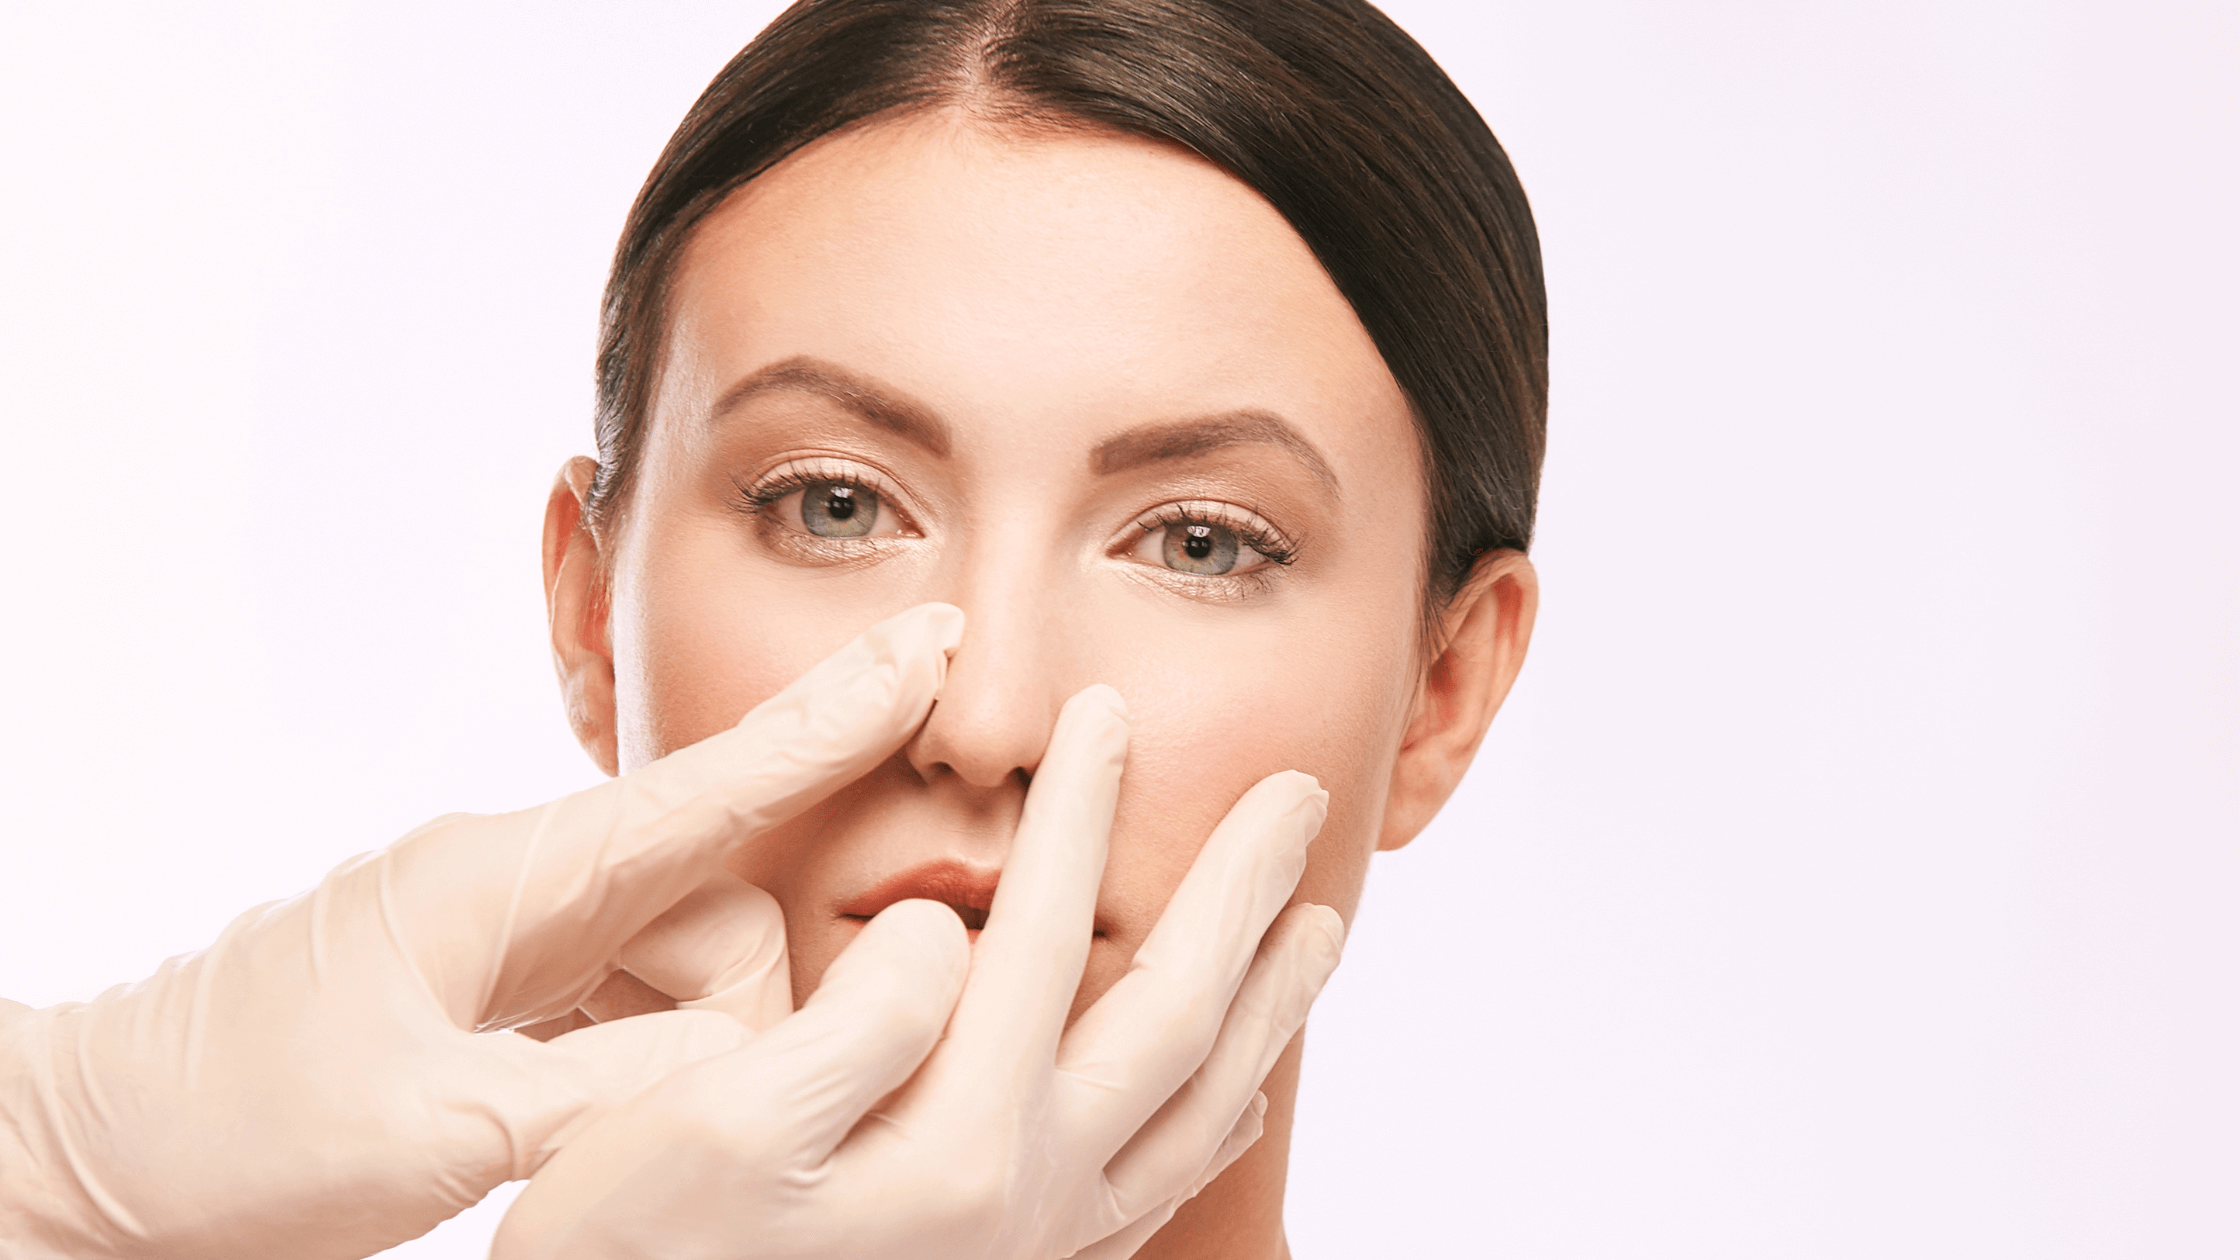 Considering a Rhinoplasty? Here's What You Should Know